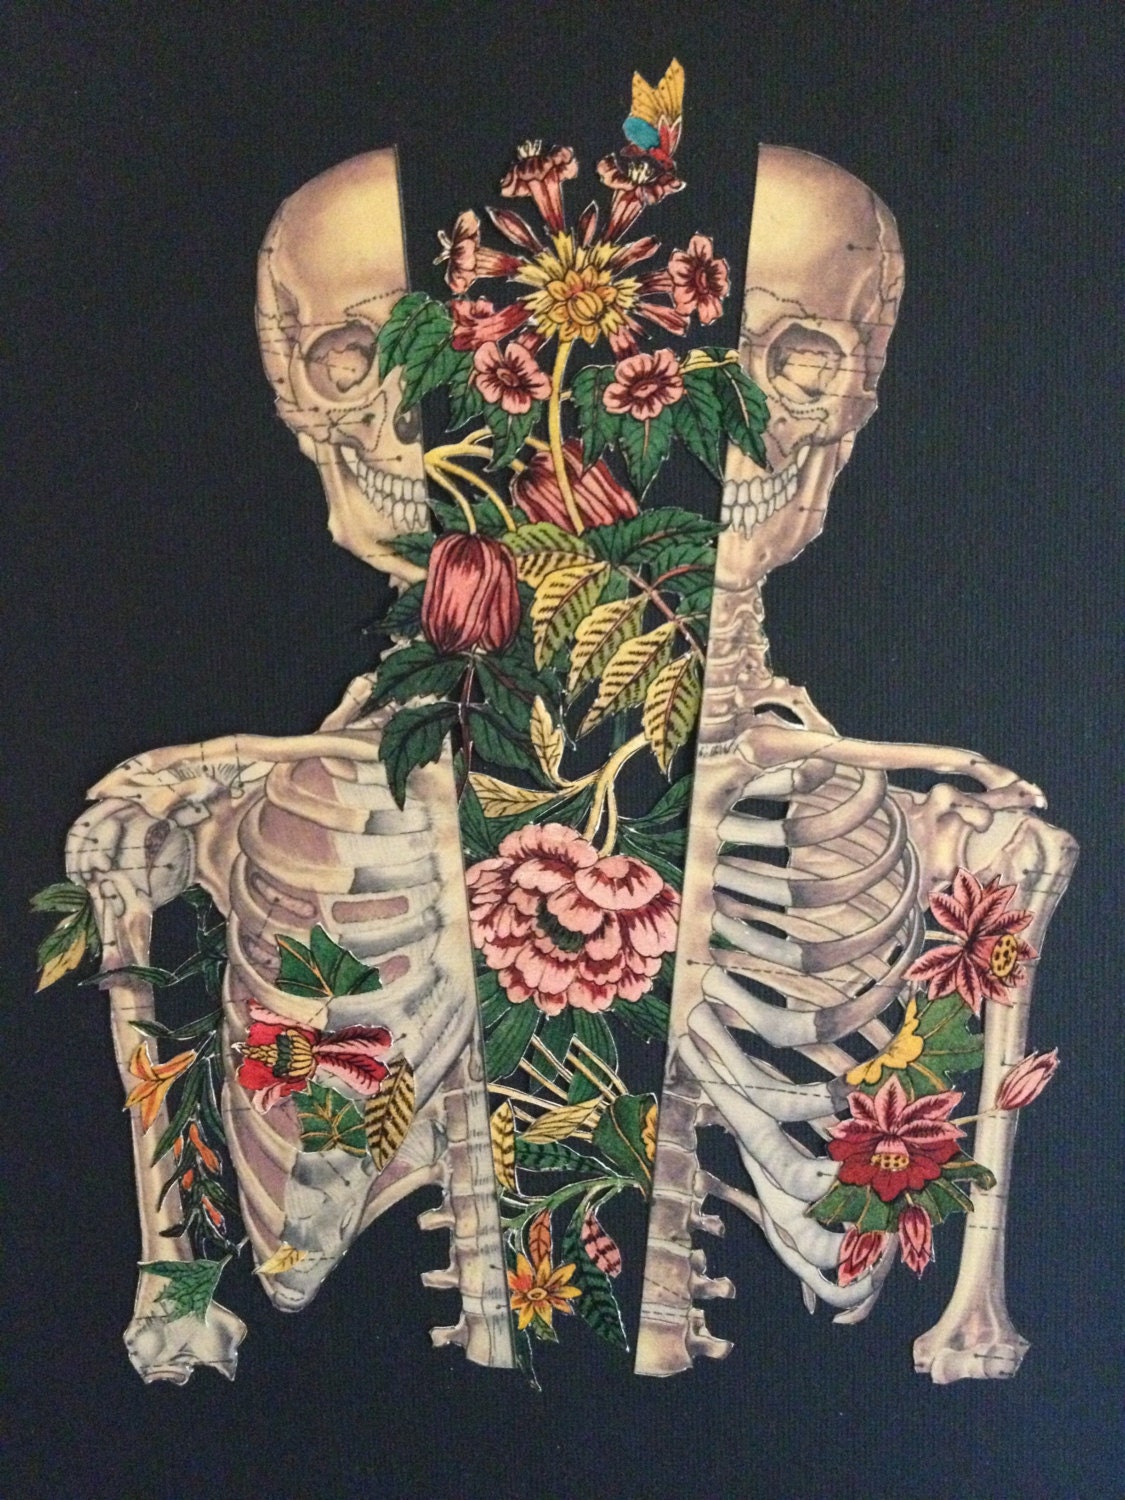 growth within anatomical anatomy collage art by by Bedelgeuse